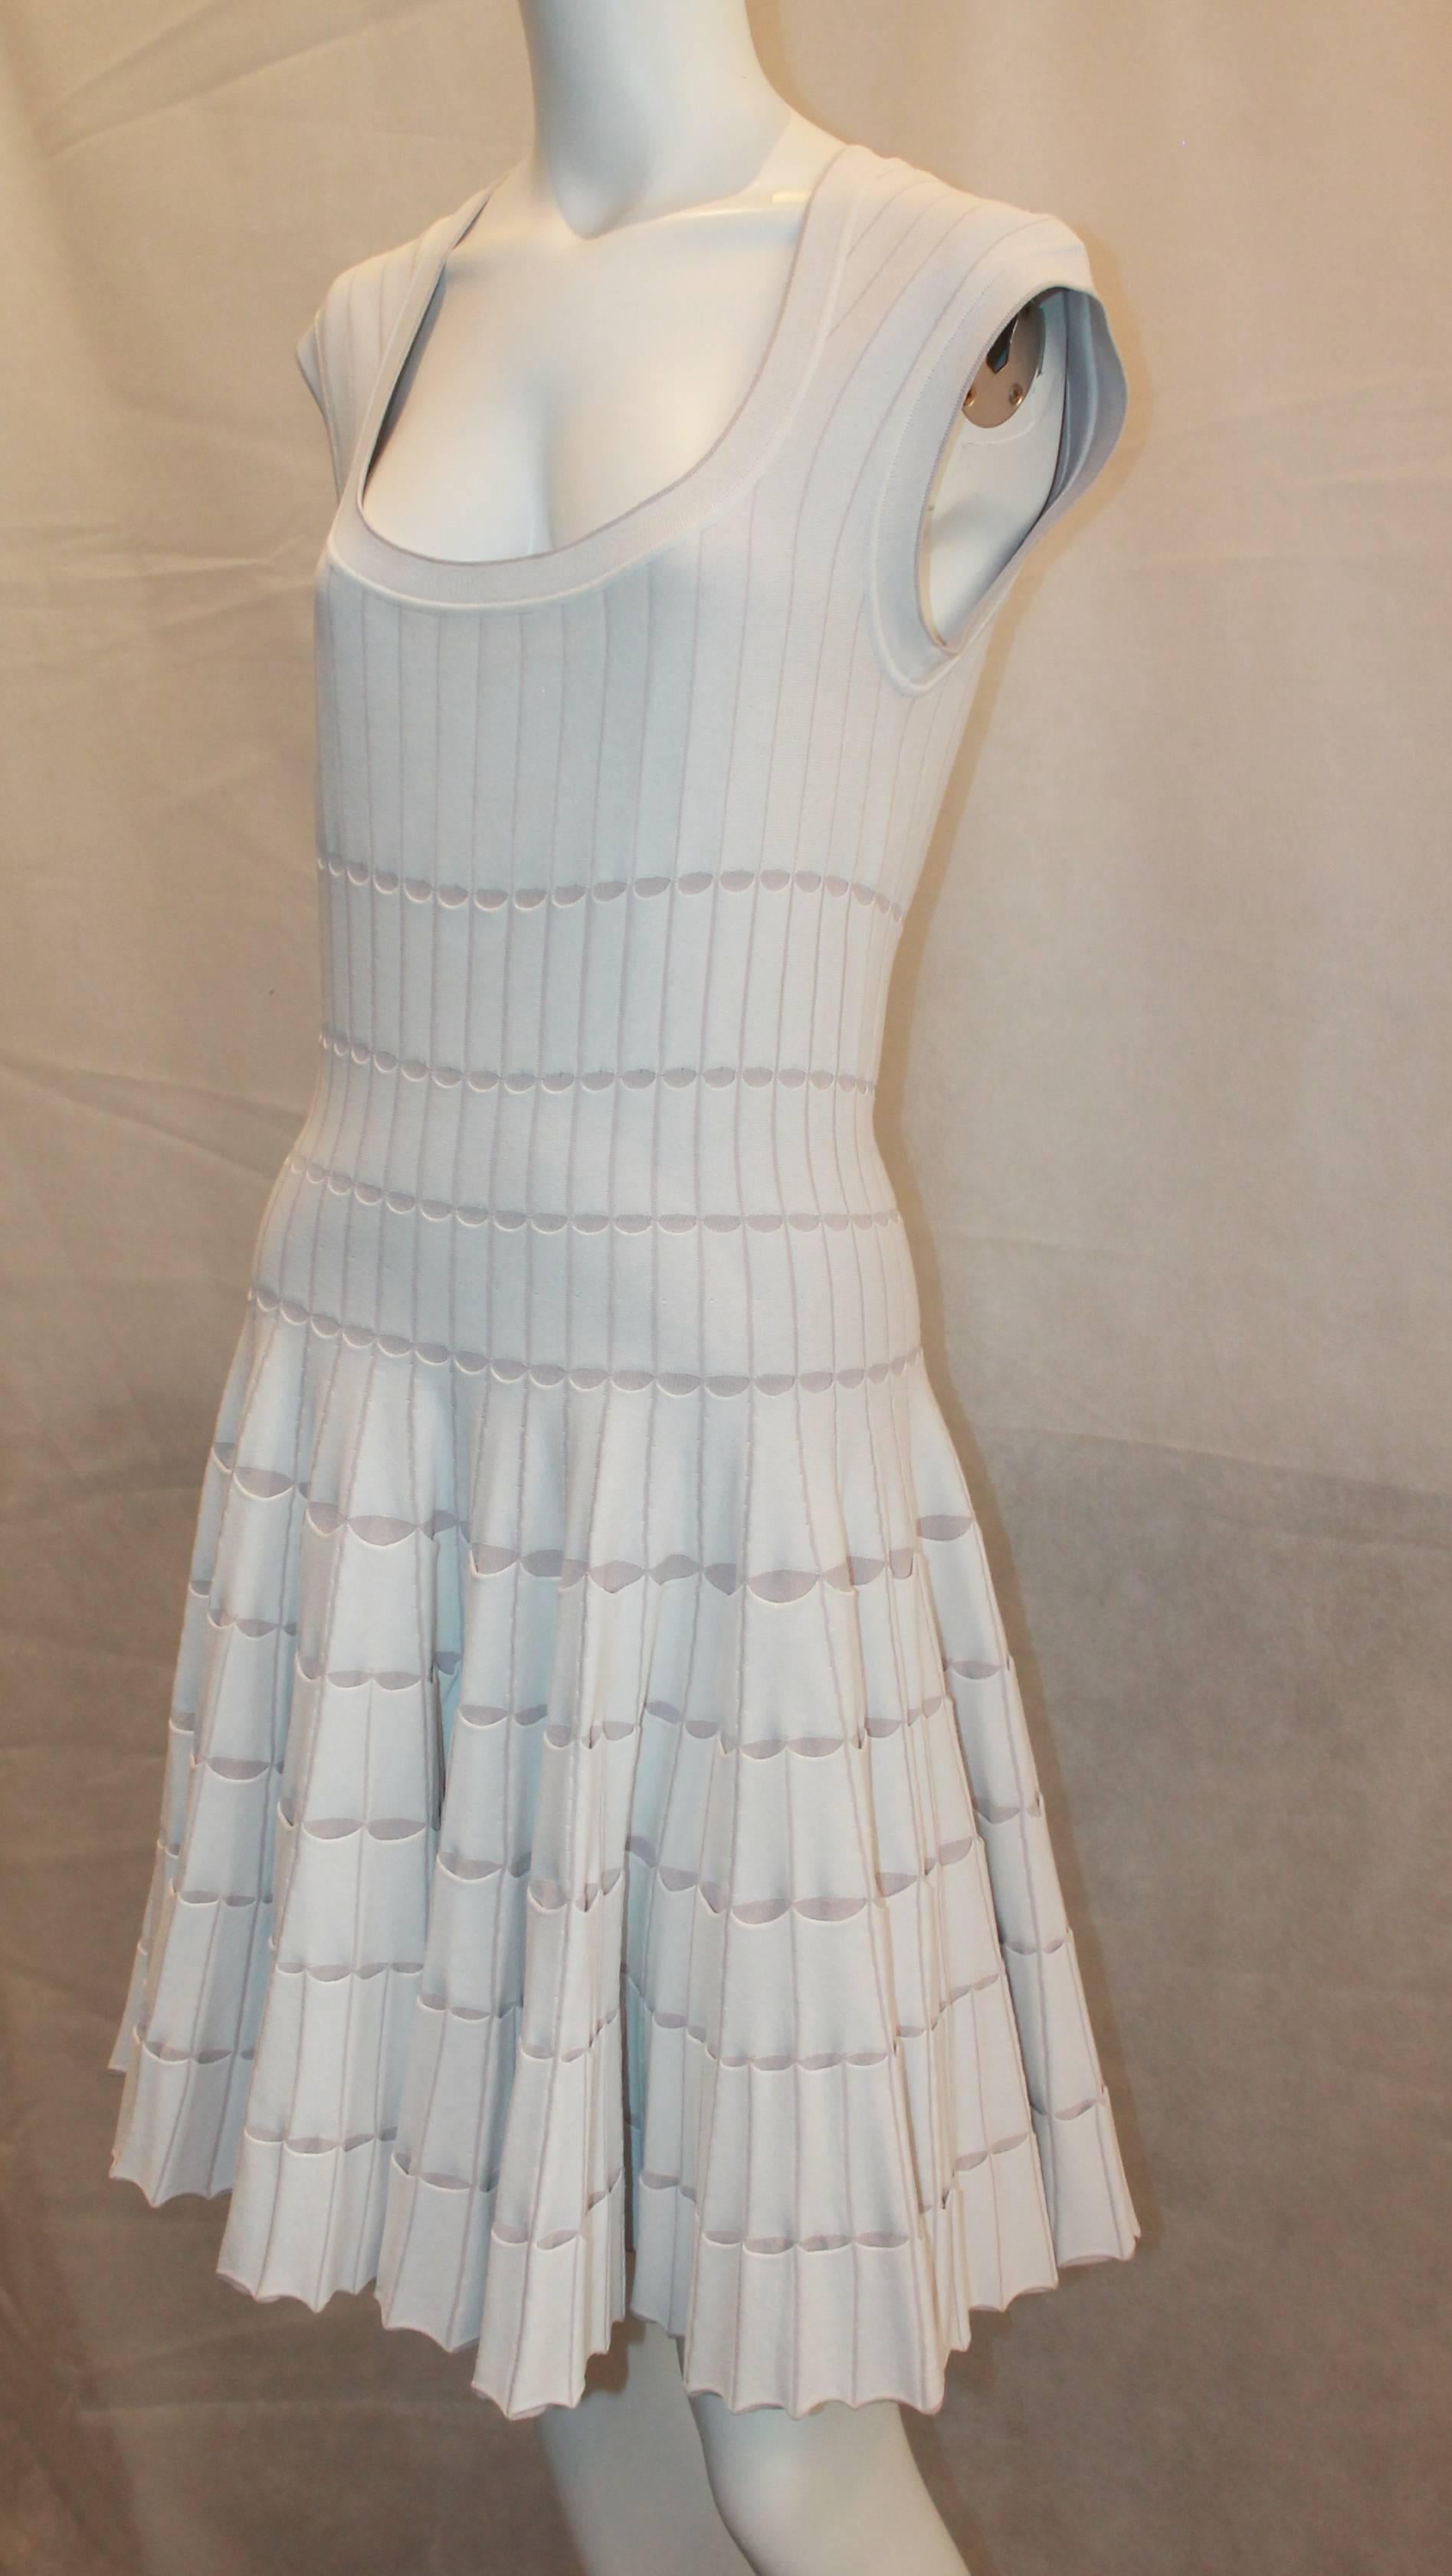 Azzedine Alaia White & Taupe Stretch Pleated Dress - 8. This dress is in very good condition with minor general wear all over. It is a sleeveless ribbed dress with the skirt having an according style pleating and small slits all over where the taupe